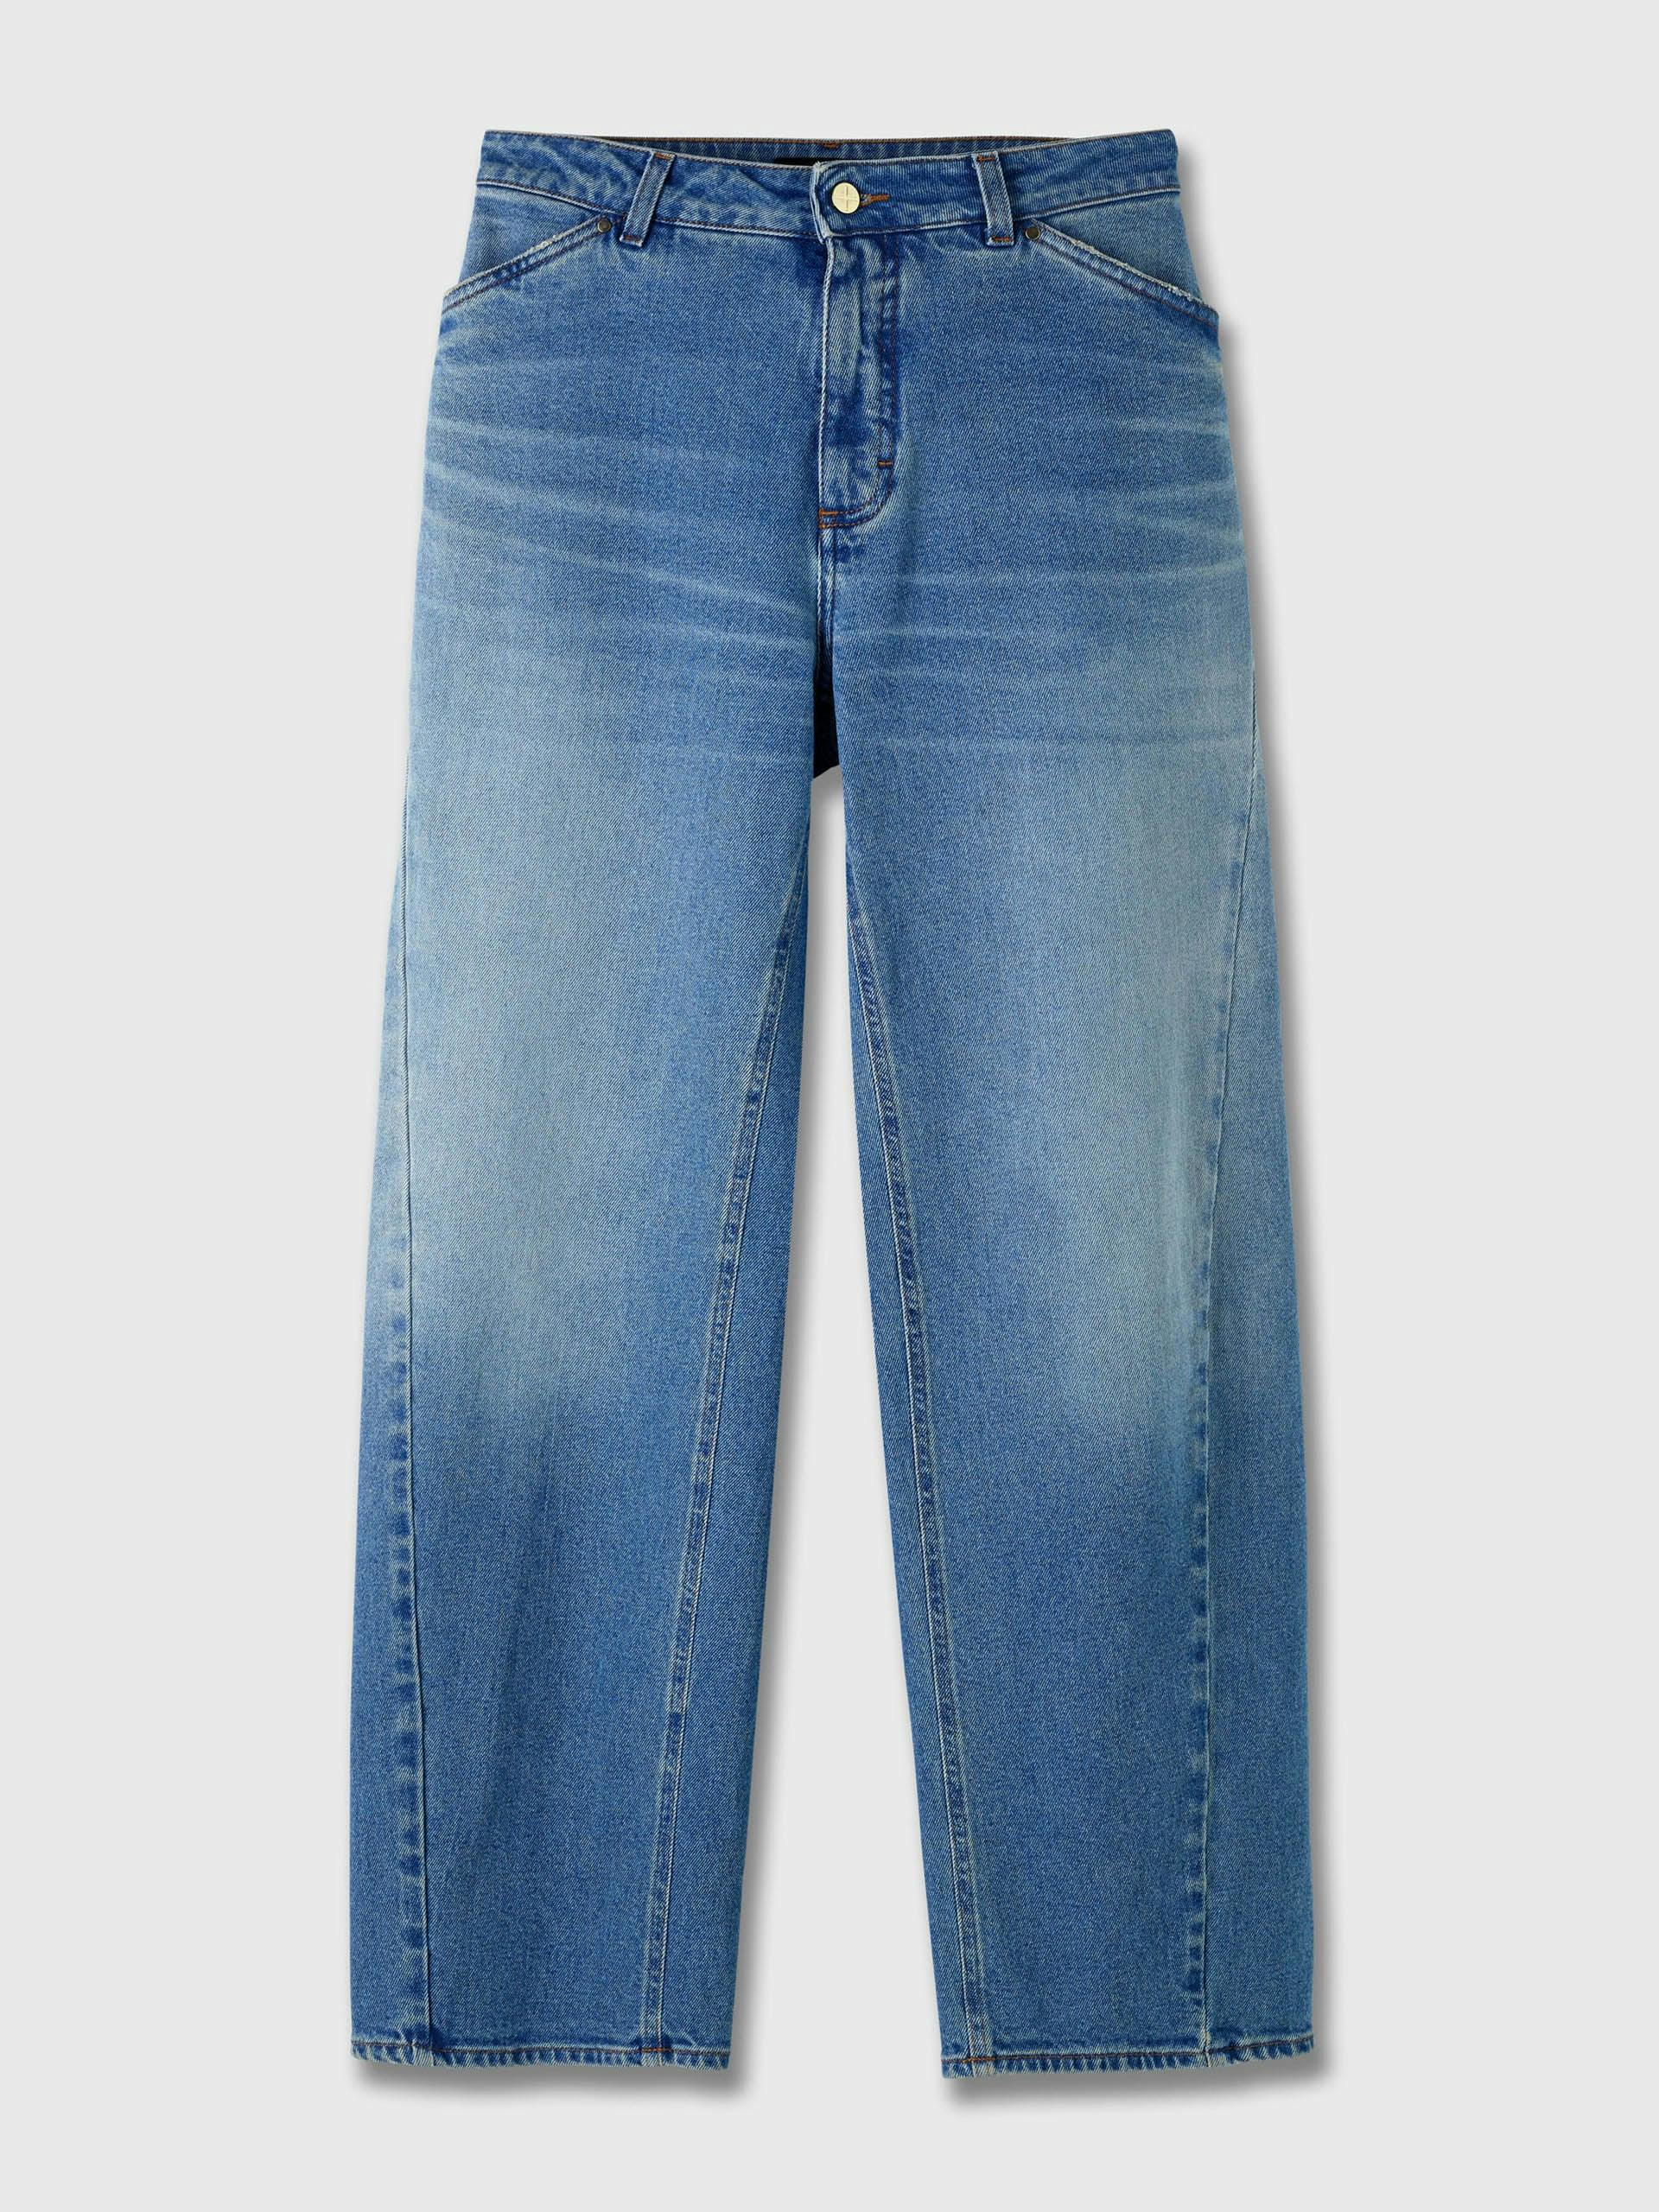 Twisted seam jeans